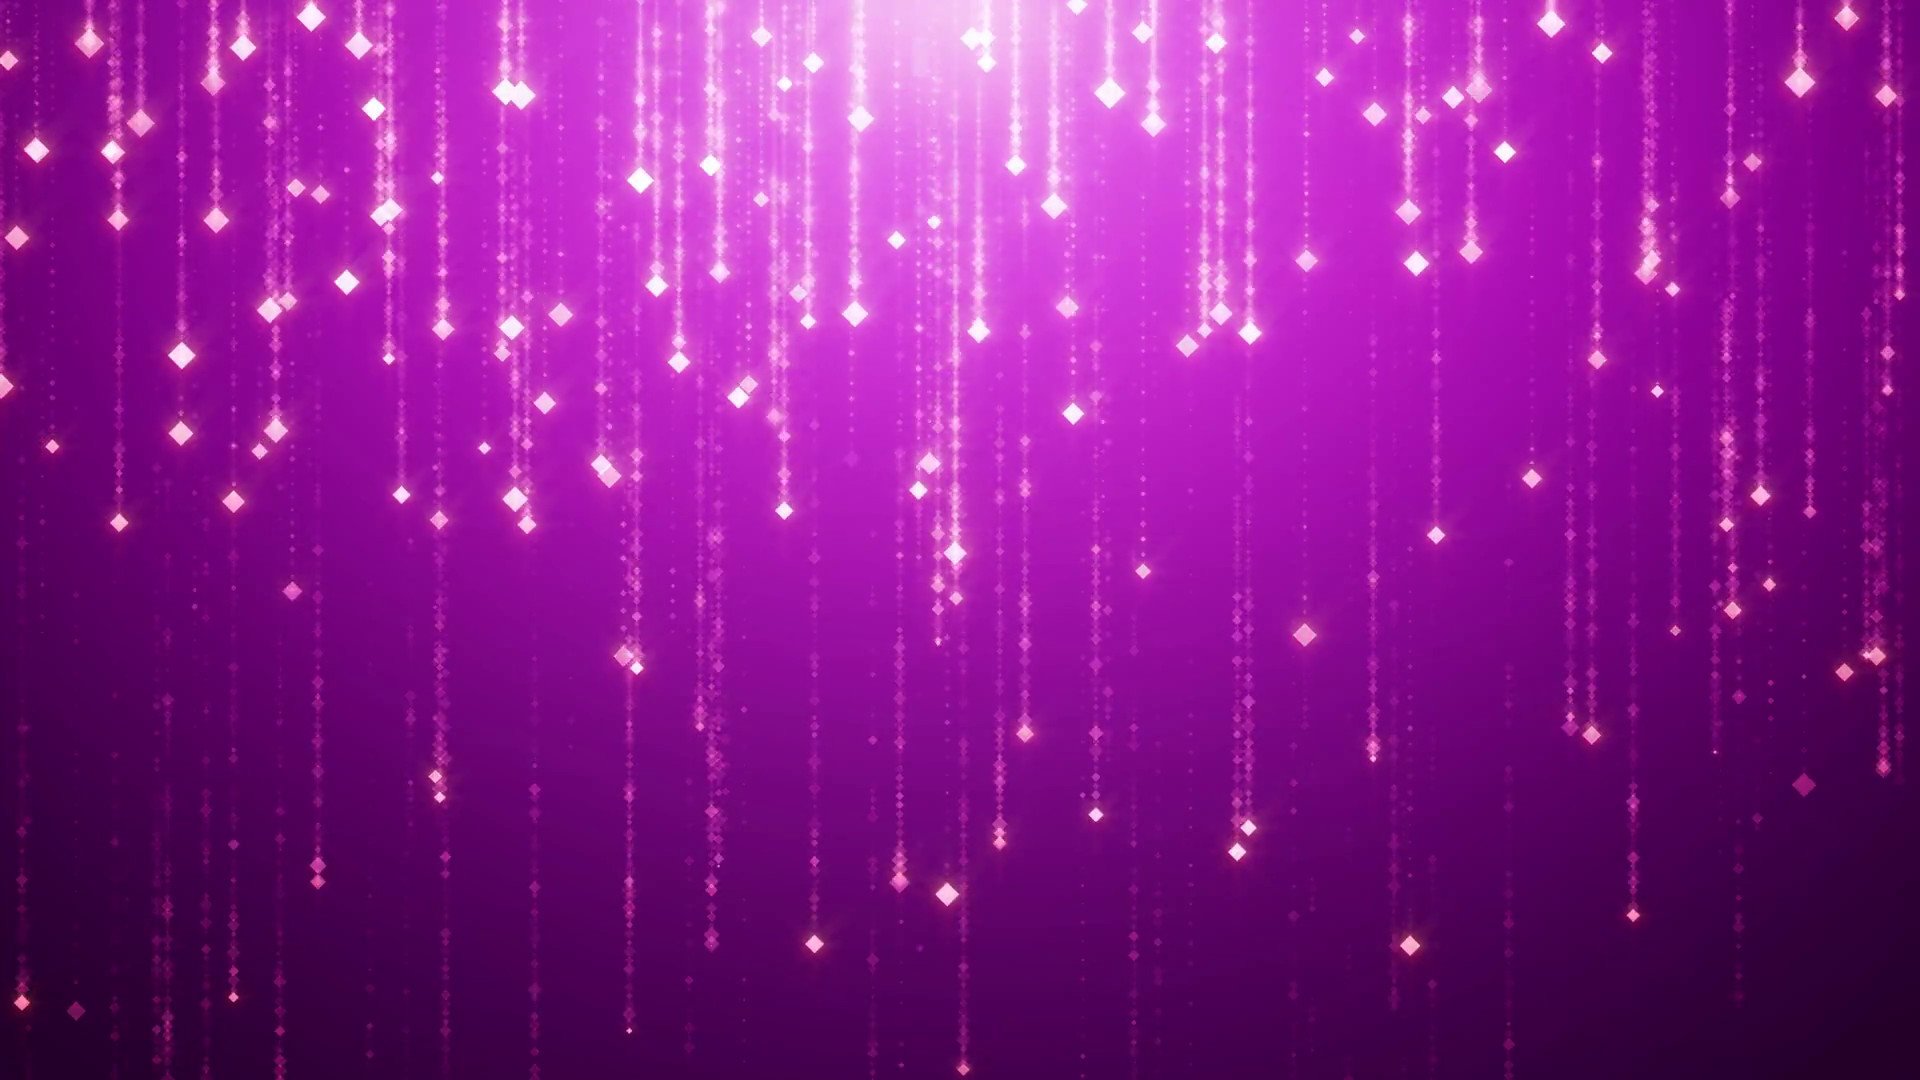 1920x1080 The golden falling particles spin and flicker on the purple magenta  background. Abstract background for